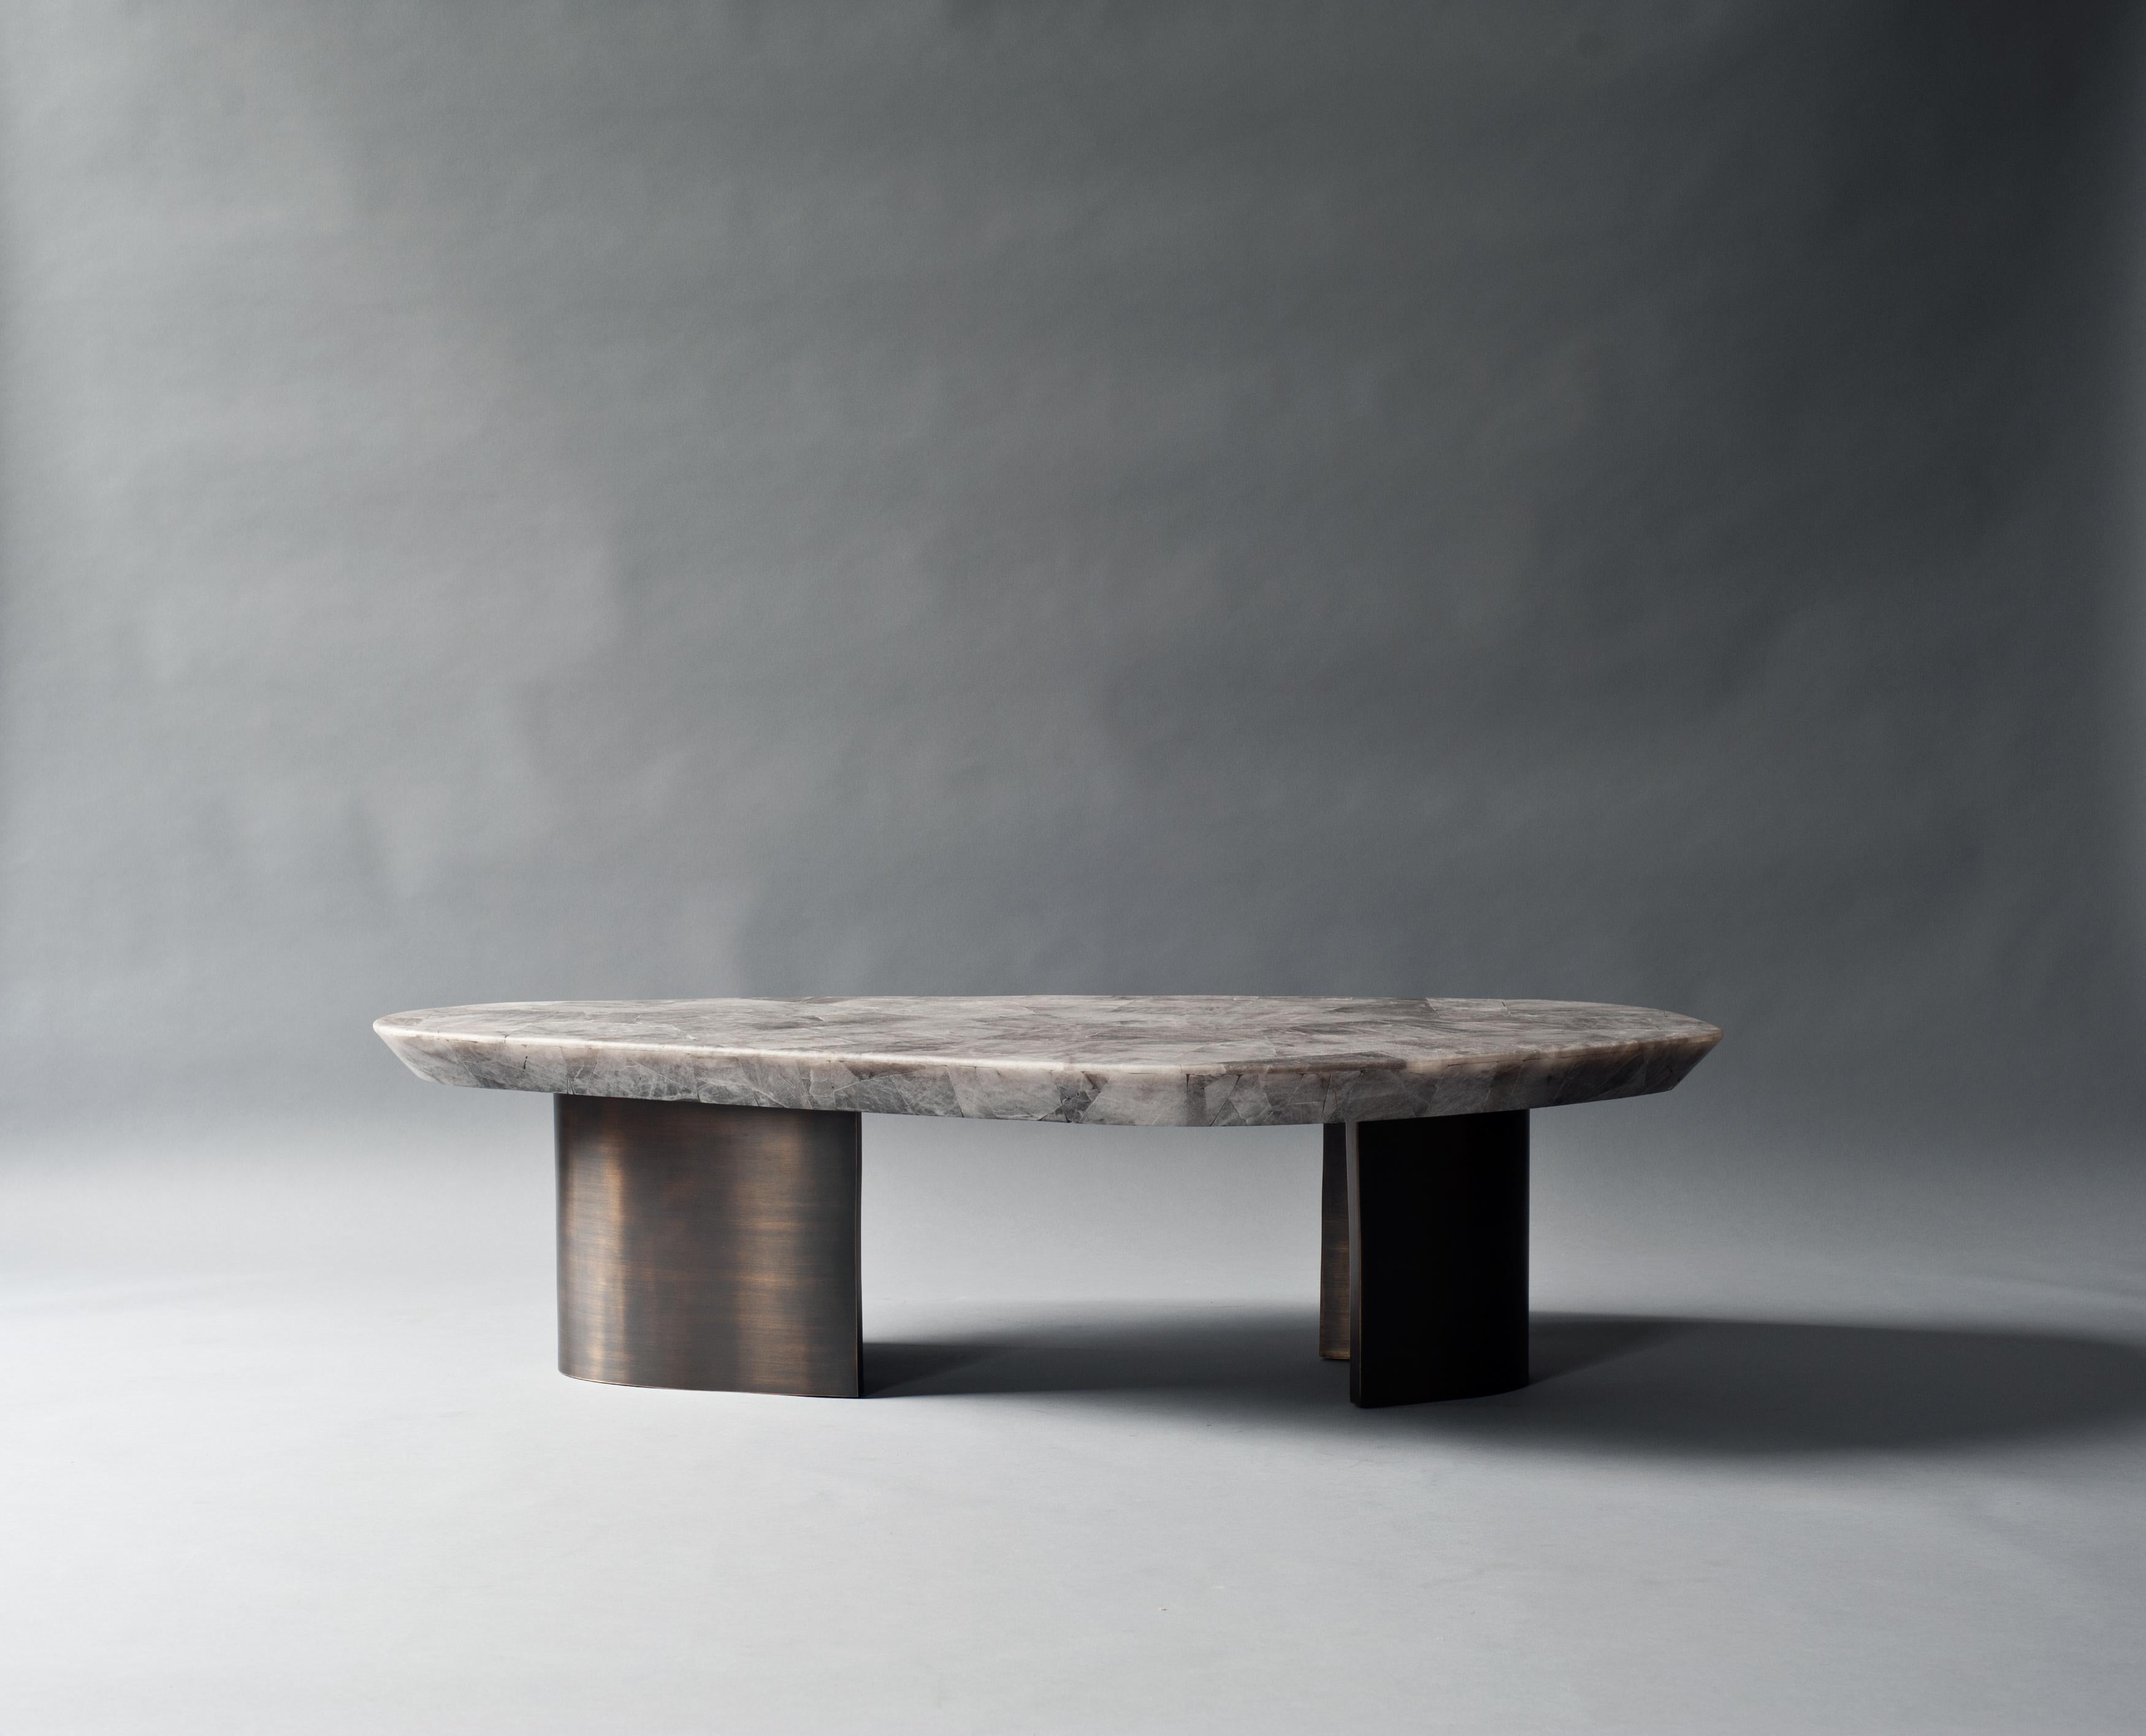 Ledge coffee table by DeMuro Das 
Dimensions: W 68 x D 126.6 x H 32.9 cm
Materials: Quartz (Smokey) - Leather (Random)
 Solid brass (Antique)

Dimensions and finishes can be customized 

DeMuro Das is an international design firm and the